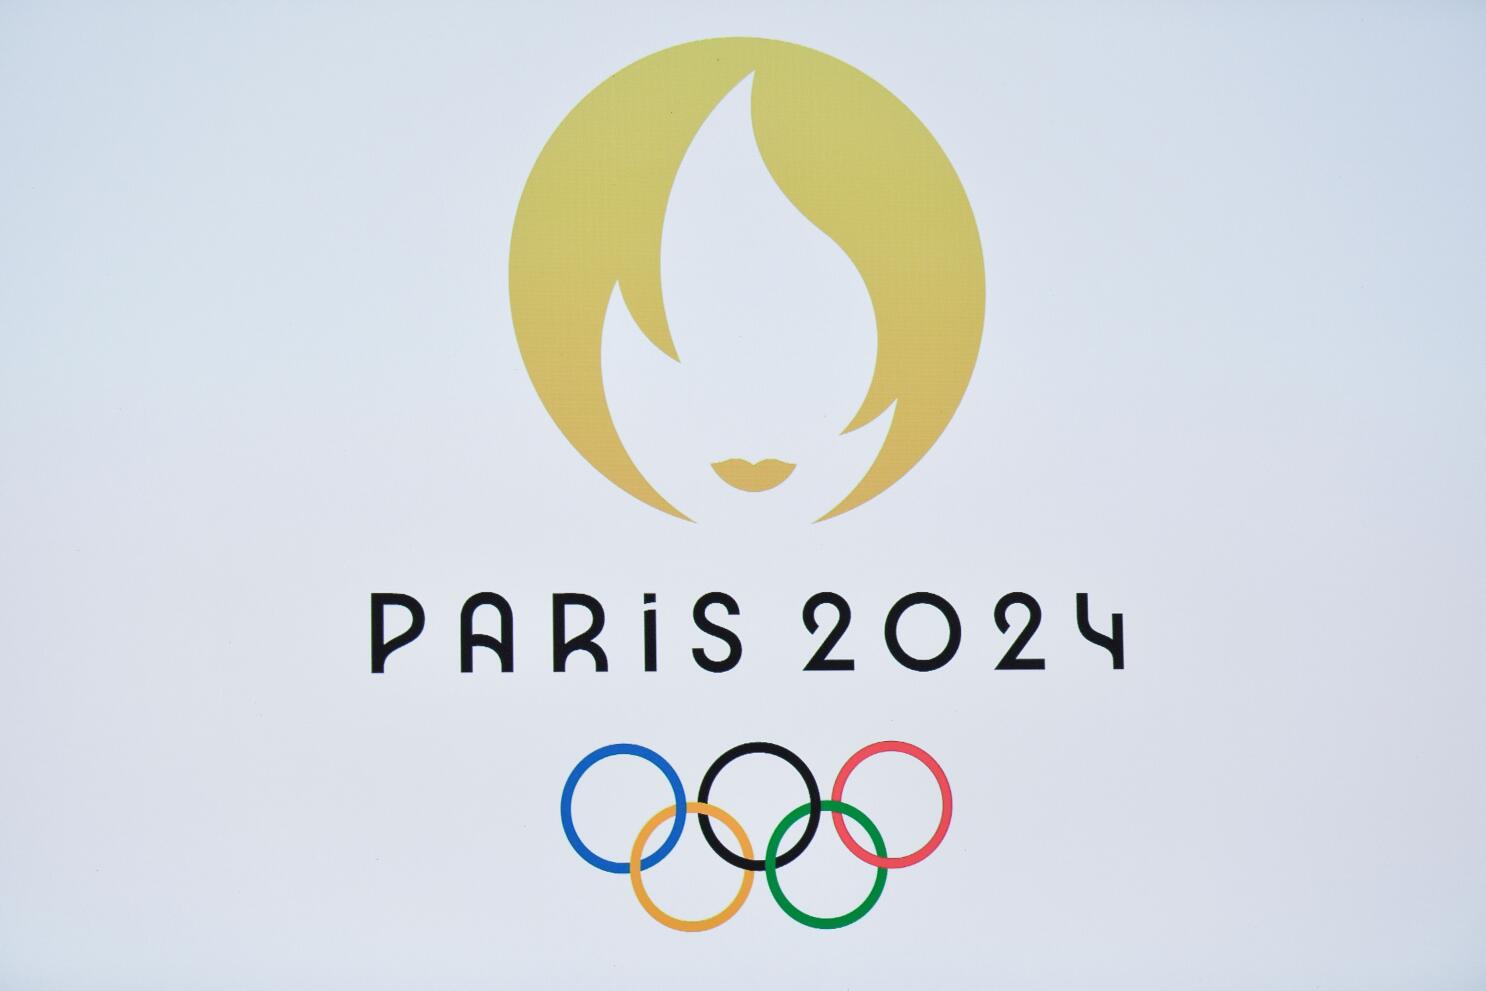 Logo for the 2024 Summer Olympics in Paris sparks debate - Los Angeles Times